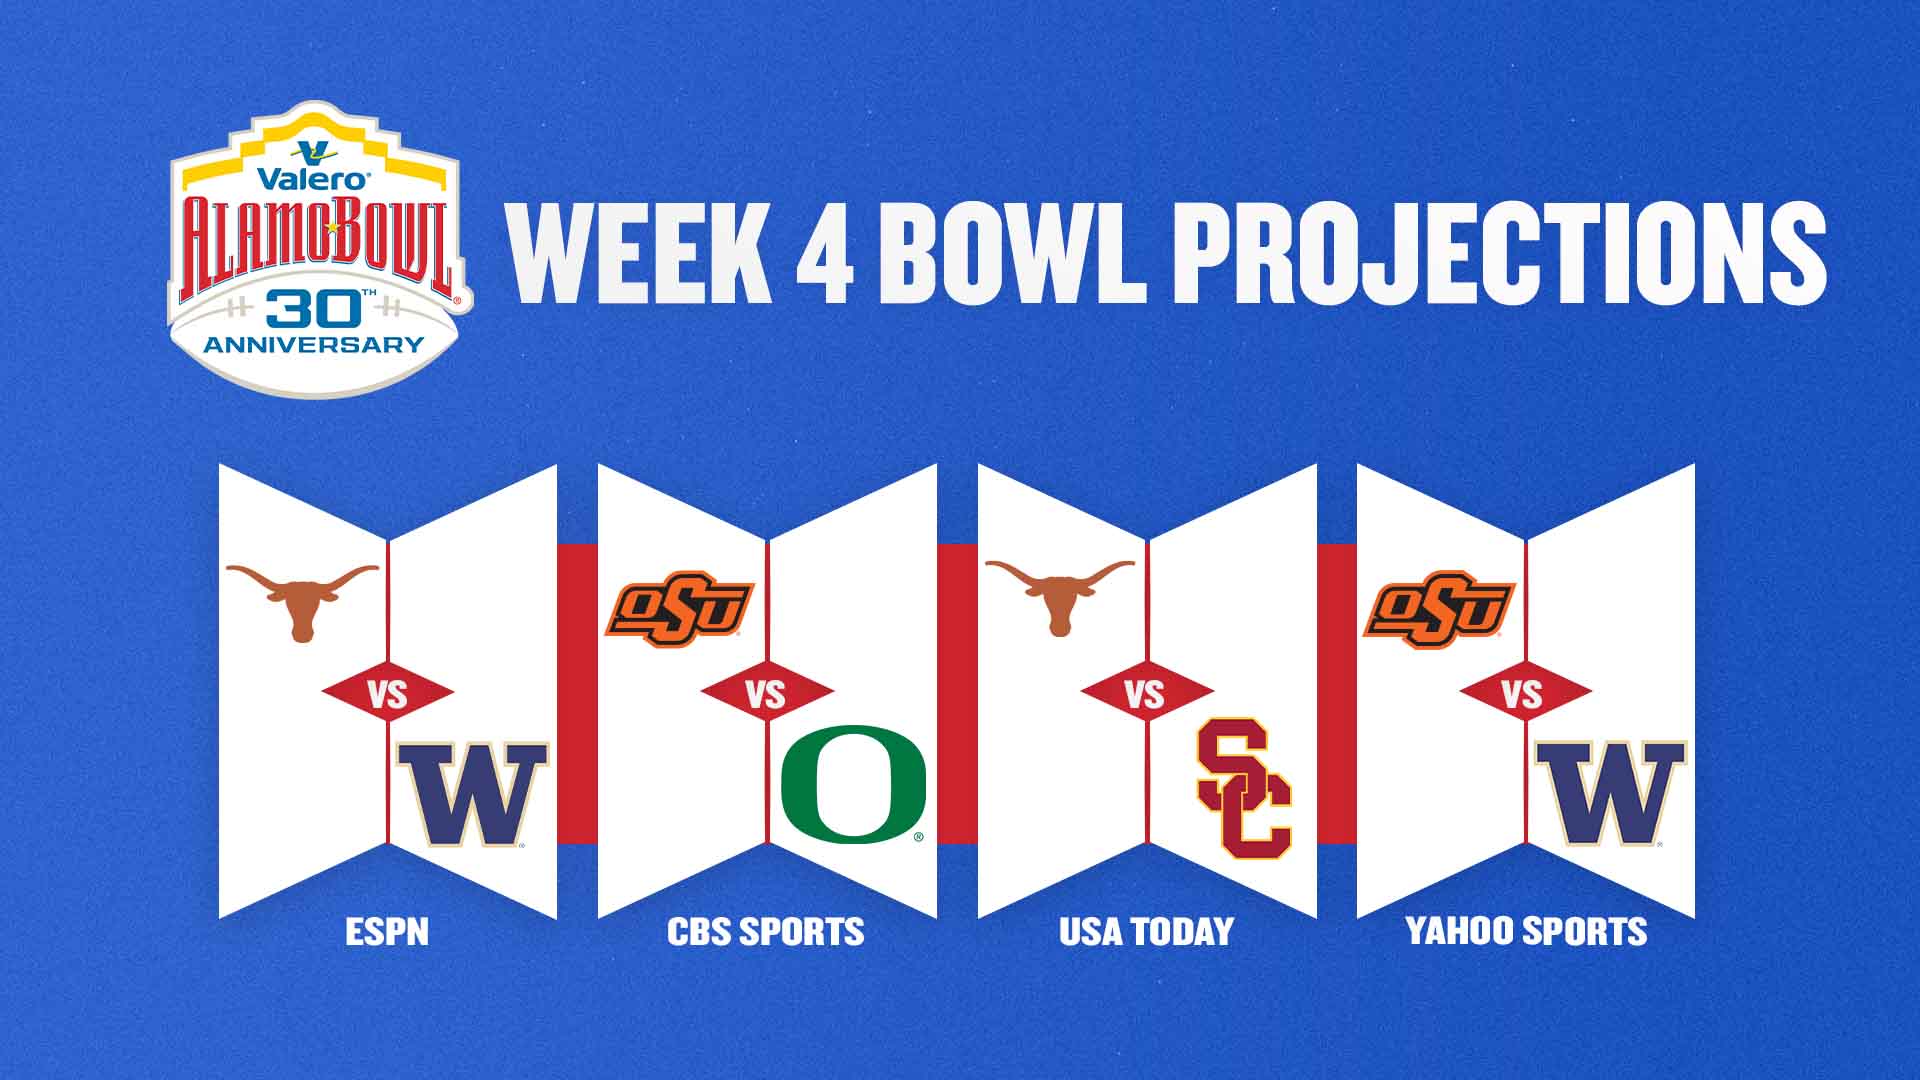 Bowl Projections new week 4